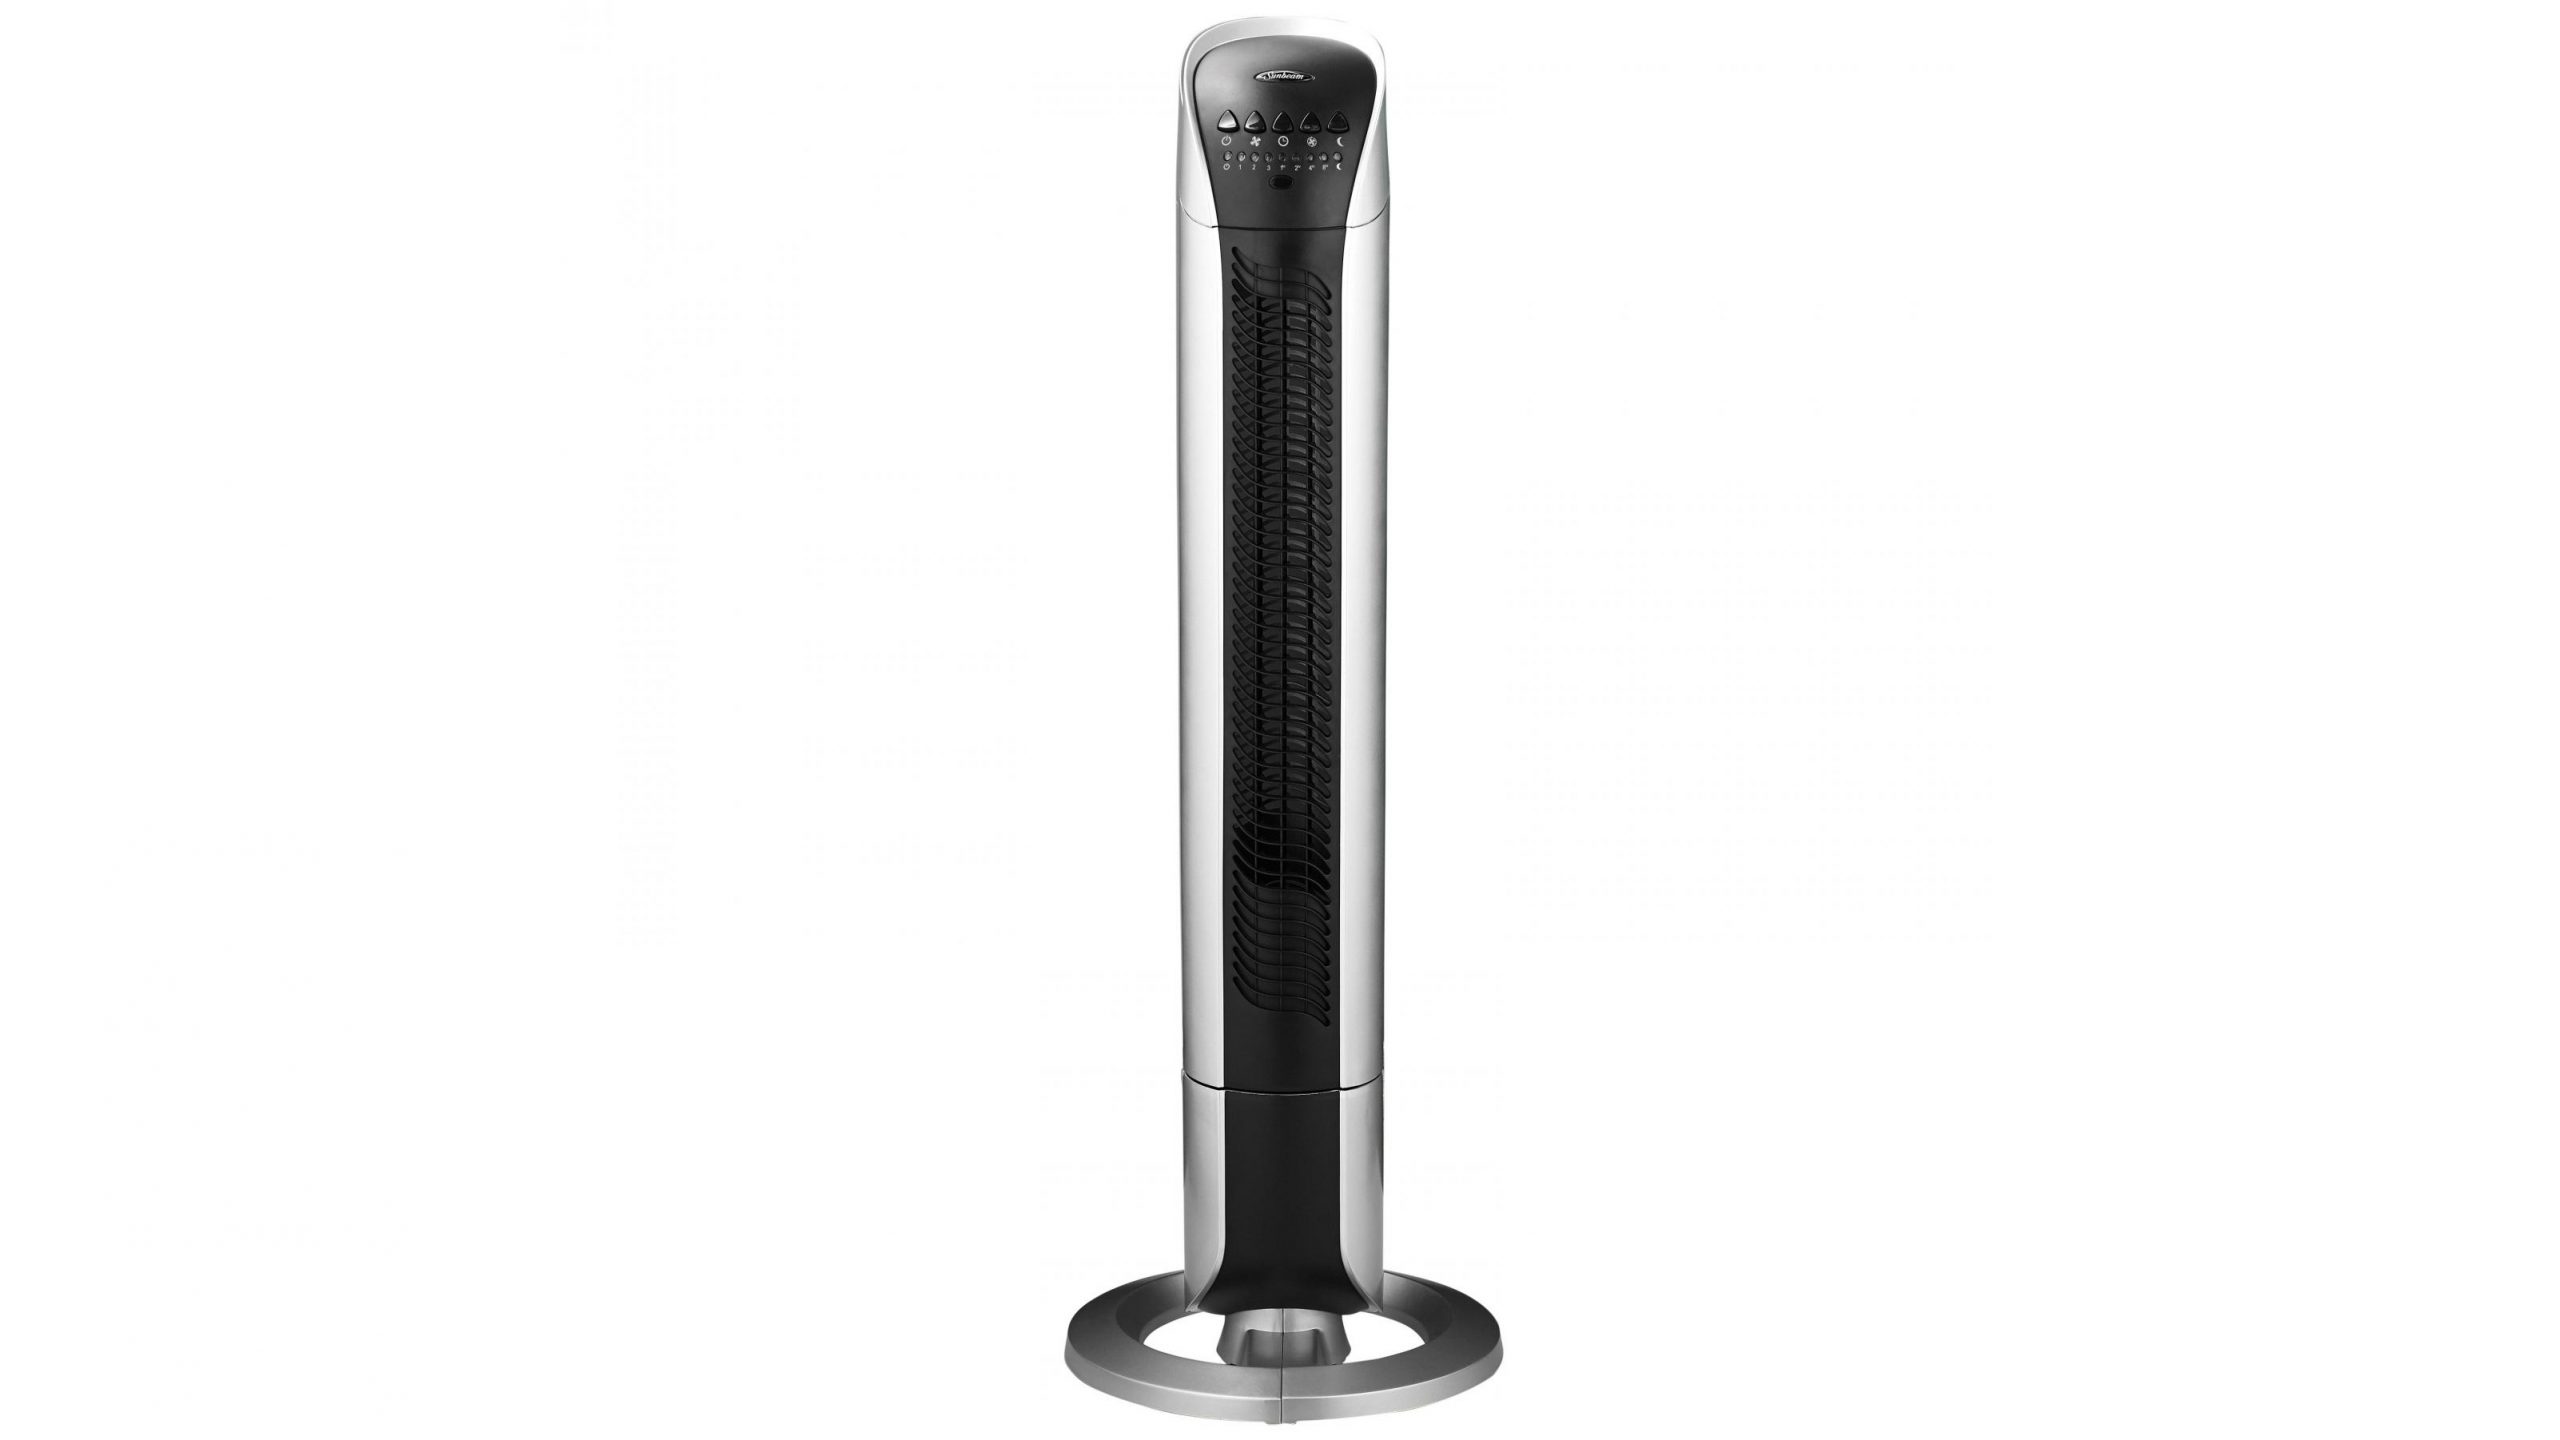 Sunbeam Fa7250 Tower Fan With Night Mode intended for proportions 3204 X 1802